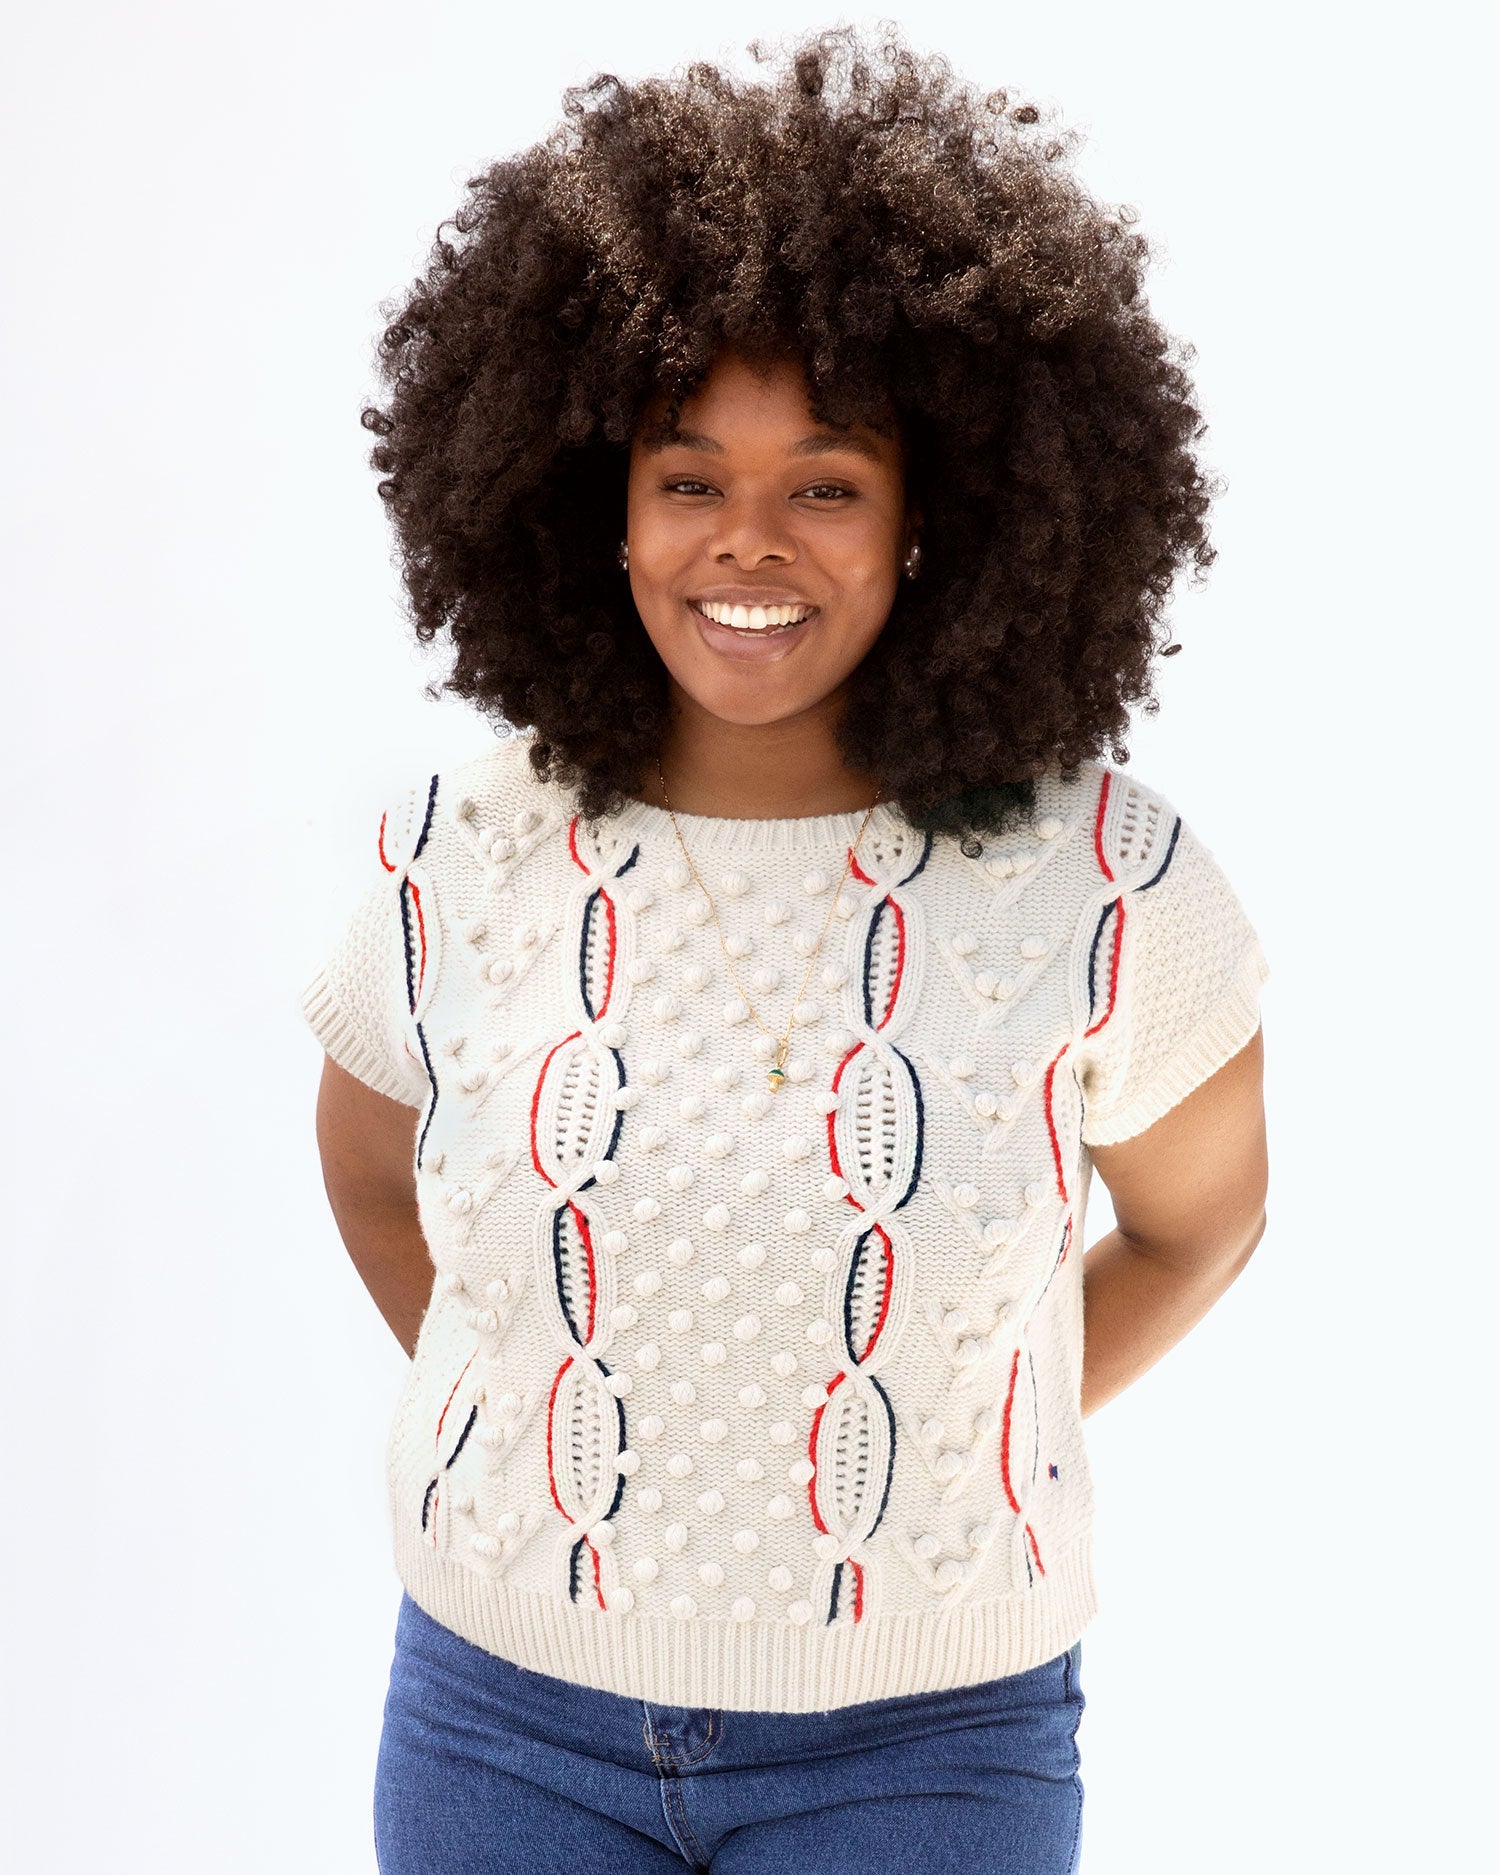 Candace wearing the cream w/ chains Odette Sweater Vest with jeans